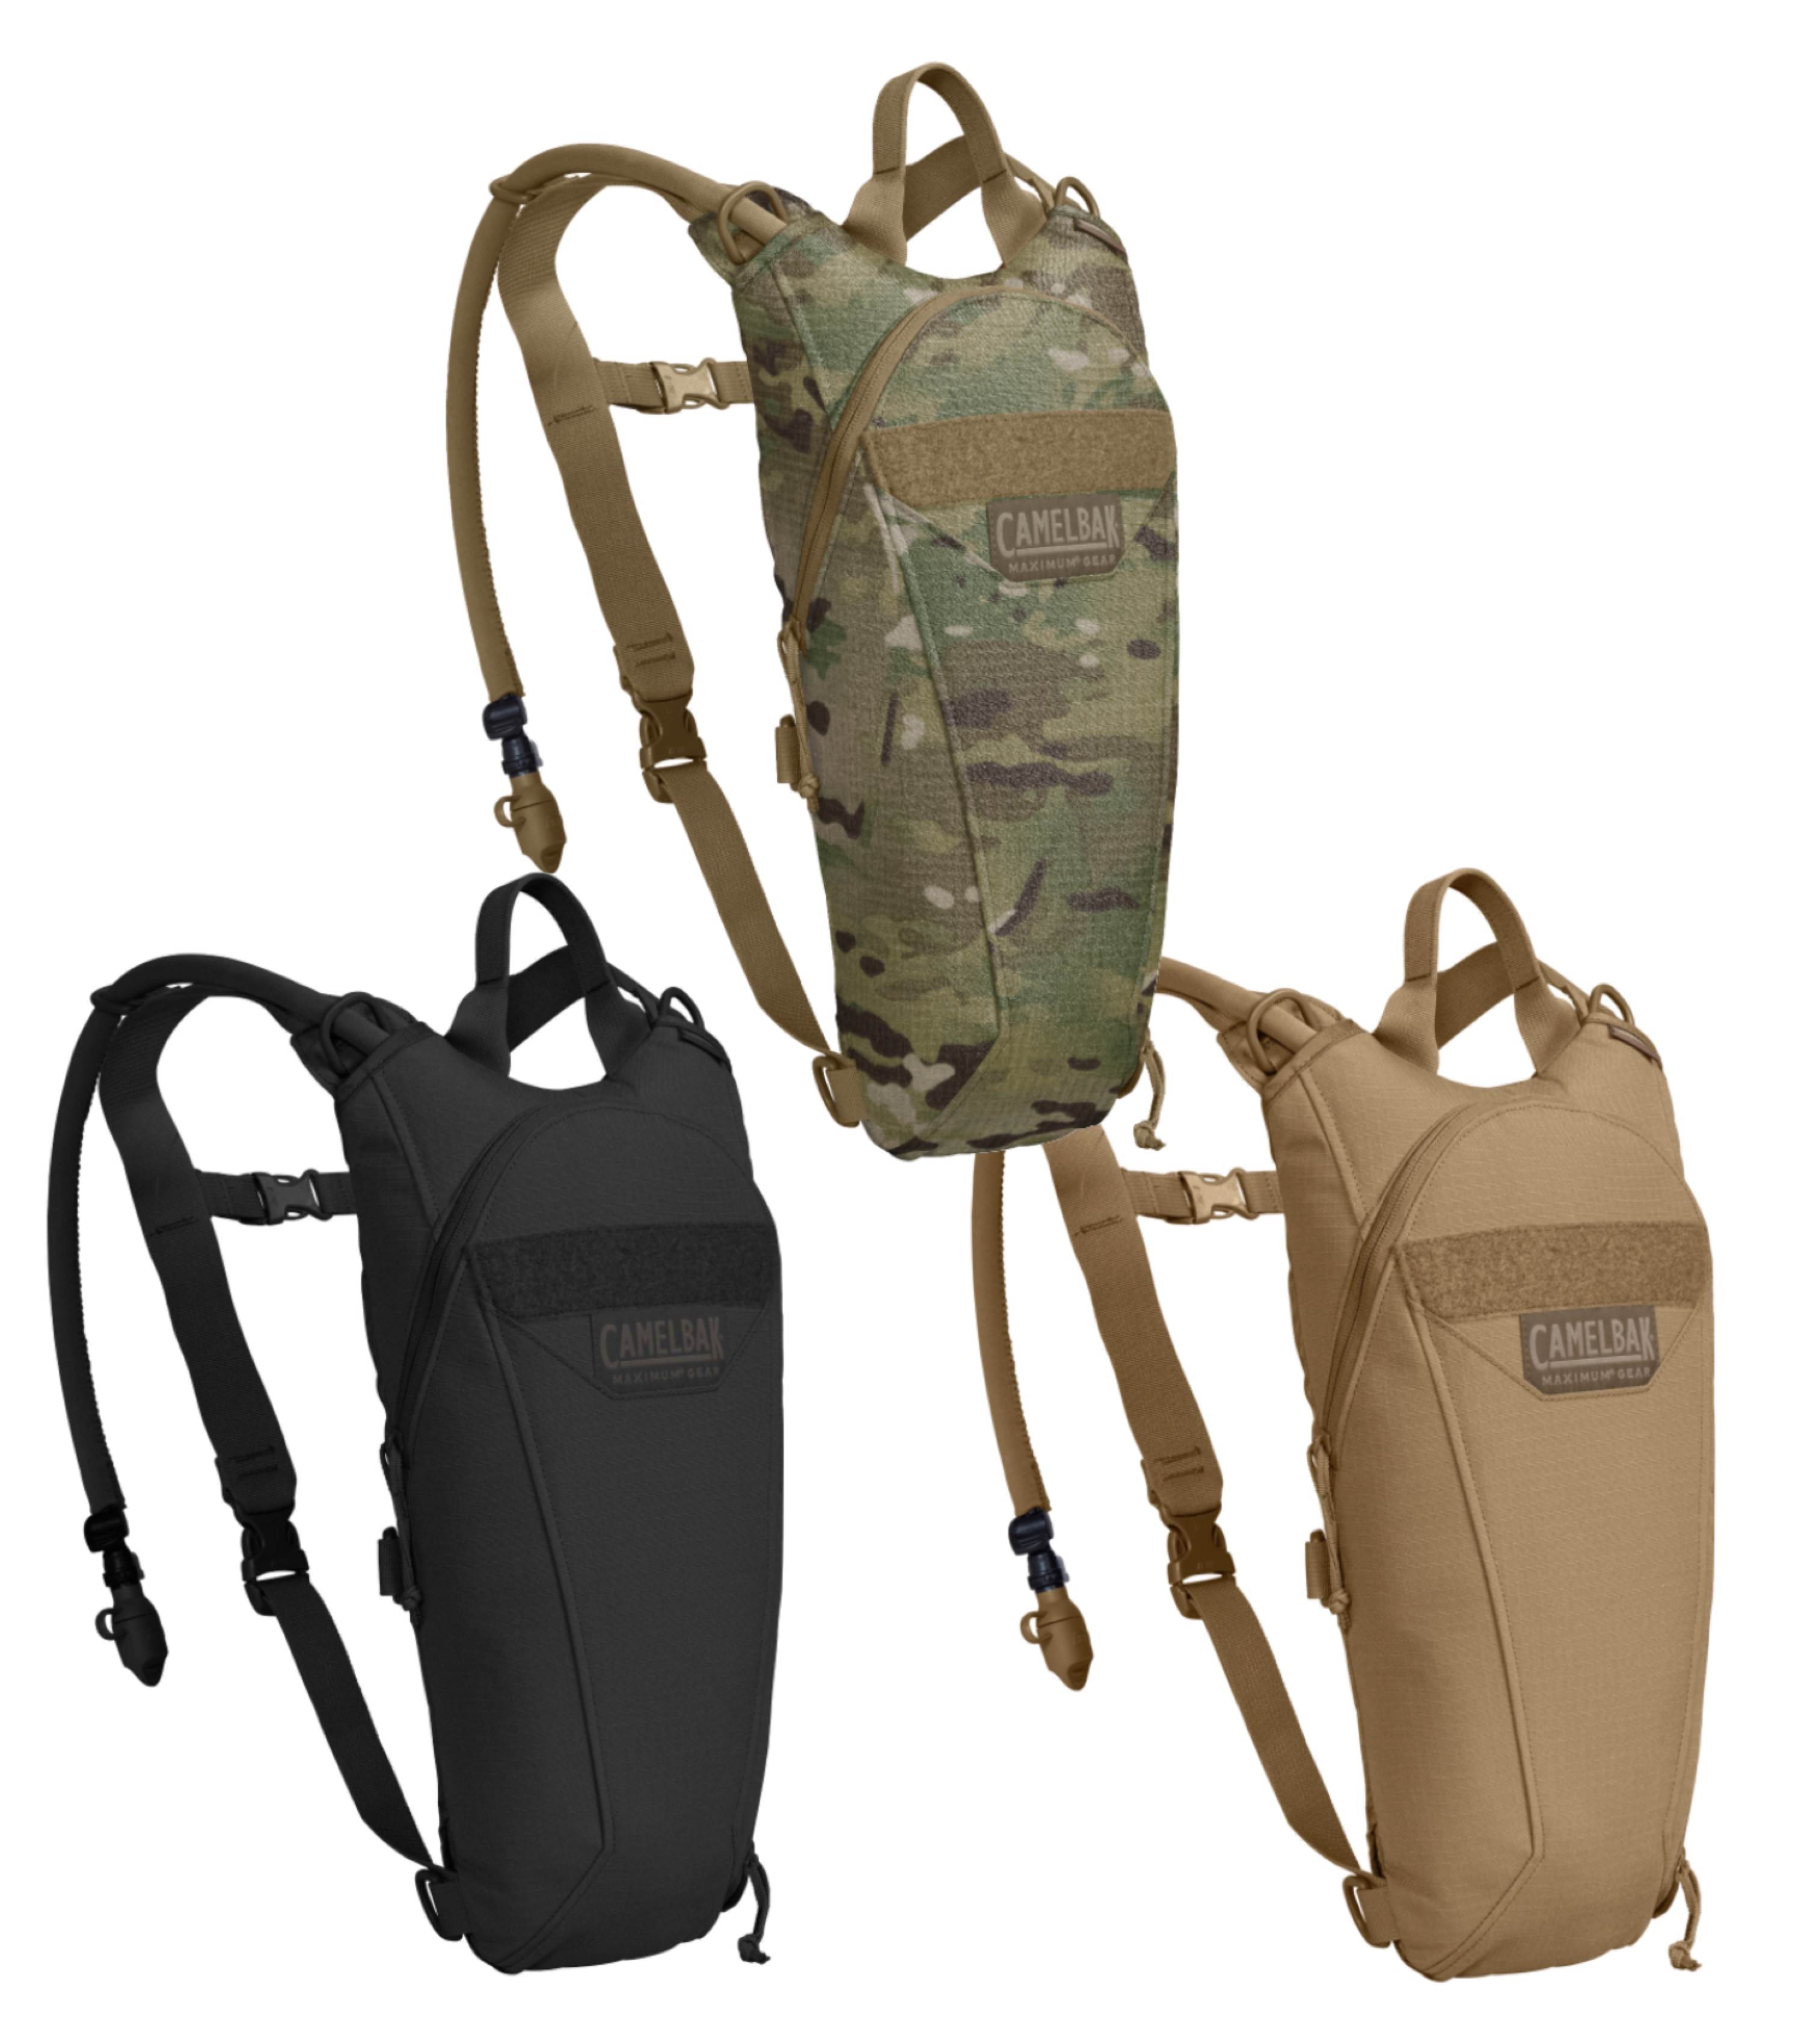 CAMELBAK THERMOBAK 3L S MILSPEC CRUX INSULATED TACTICAL HYDRATION CARRIER PACK 